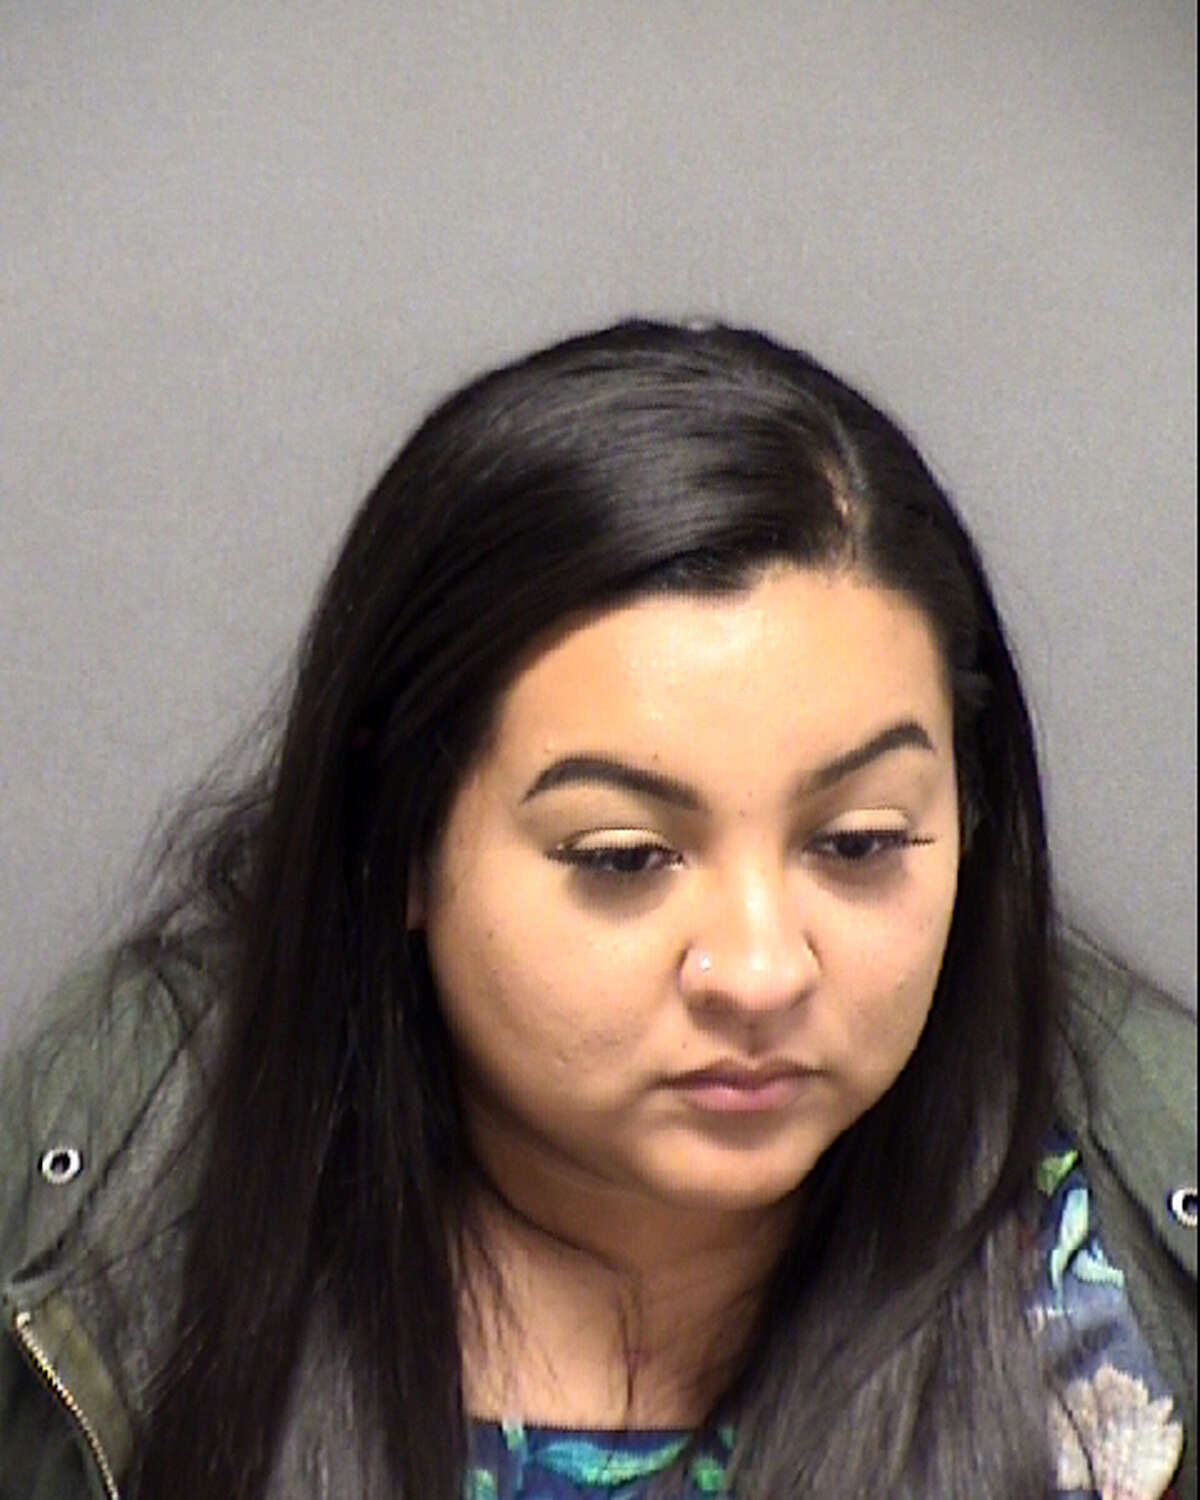 Alexis Danielle Hernandez was arrested for driving while intoxicated with a child on April 14, 2019.